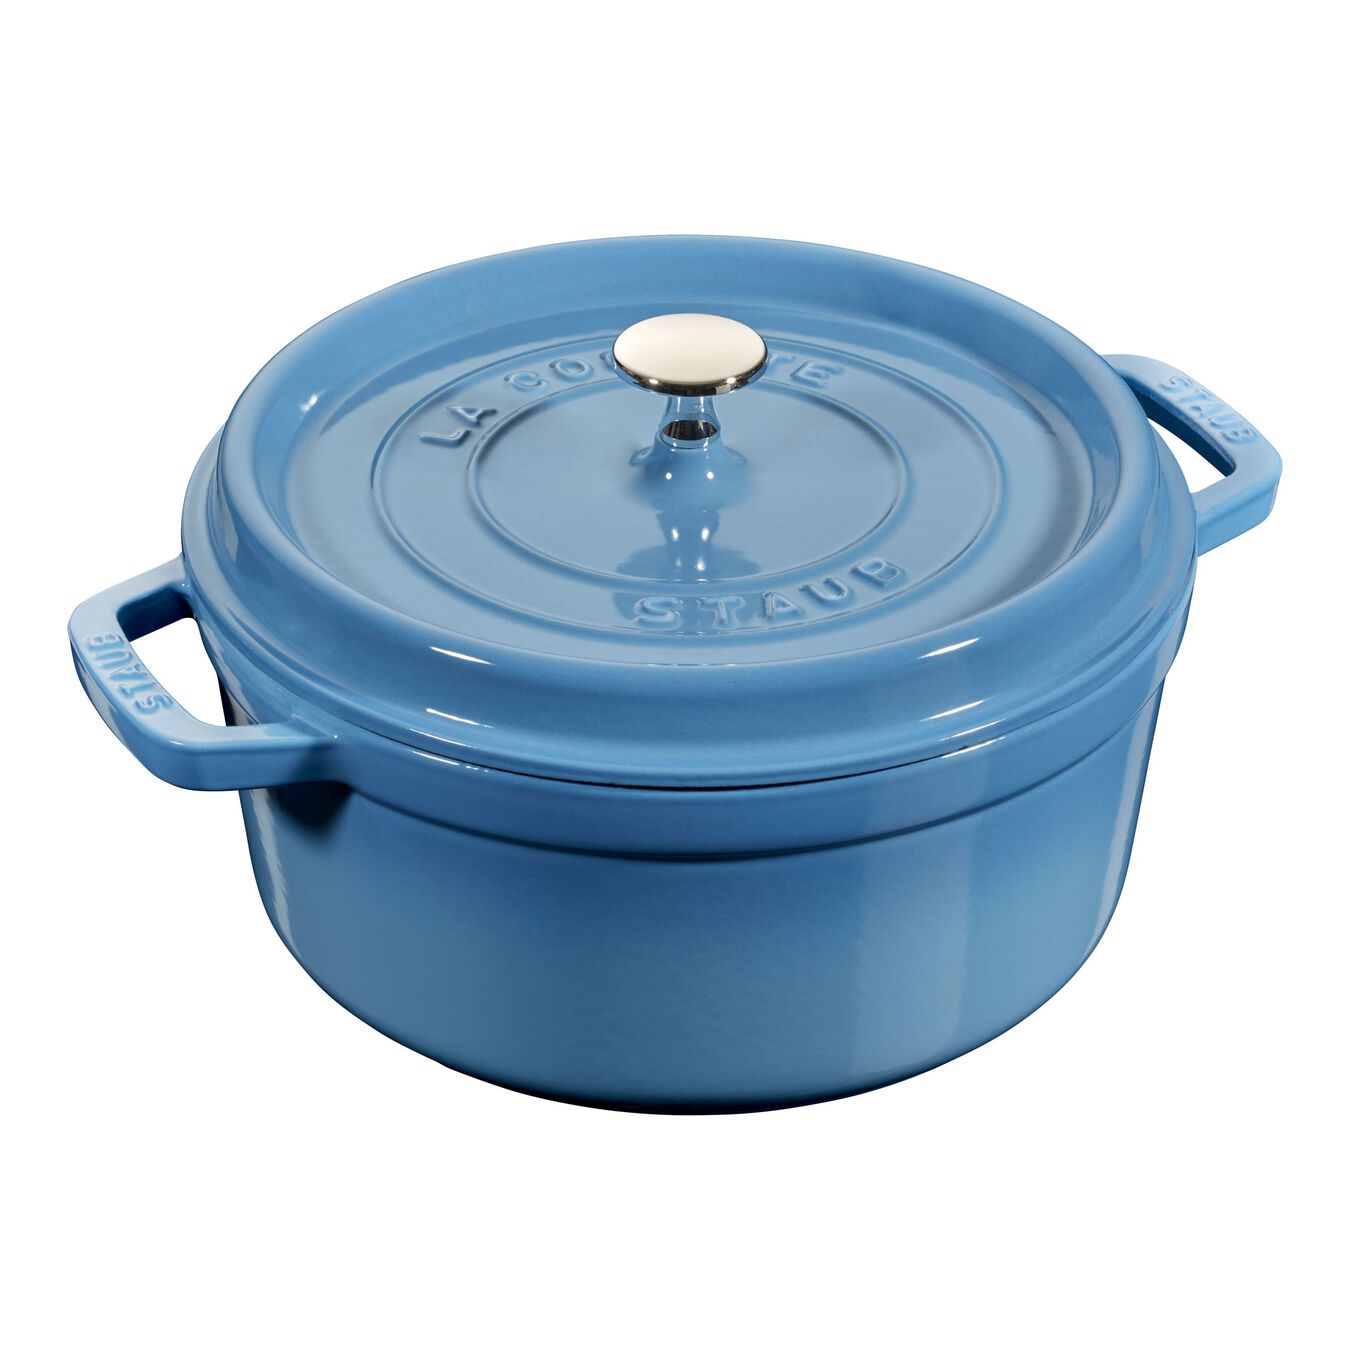 3.8 l cast iron round Cocotte, ice-blue - Visual Imperfections,,large 1